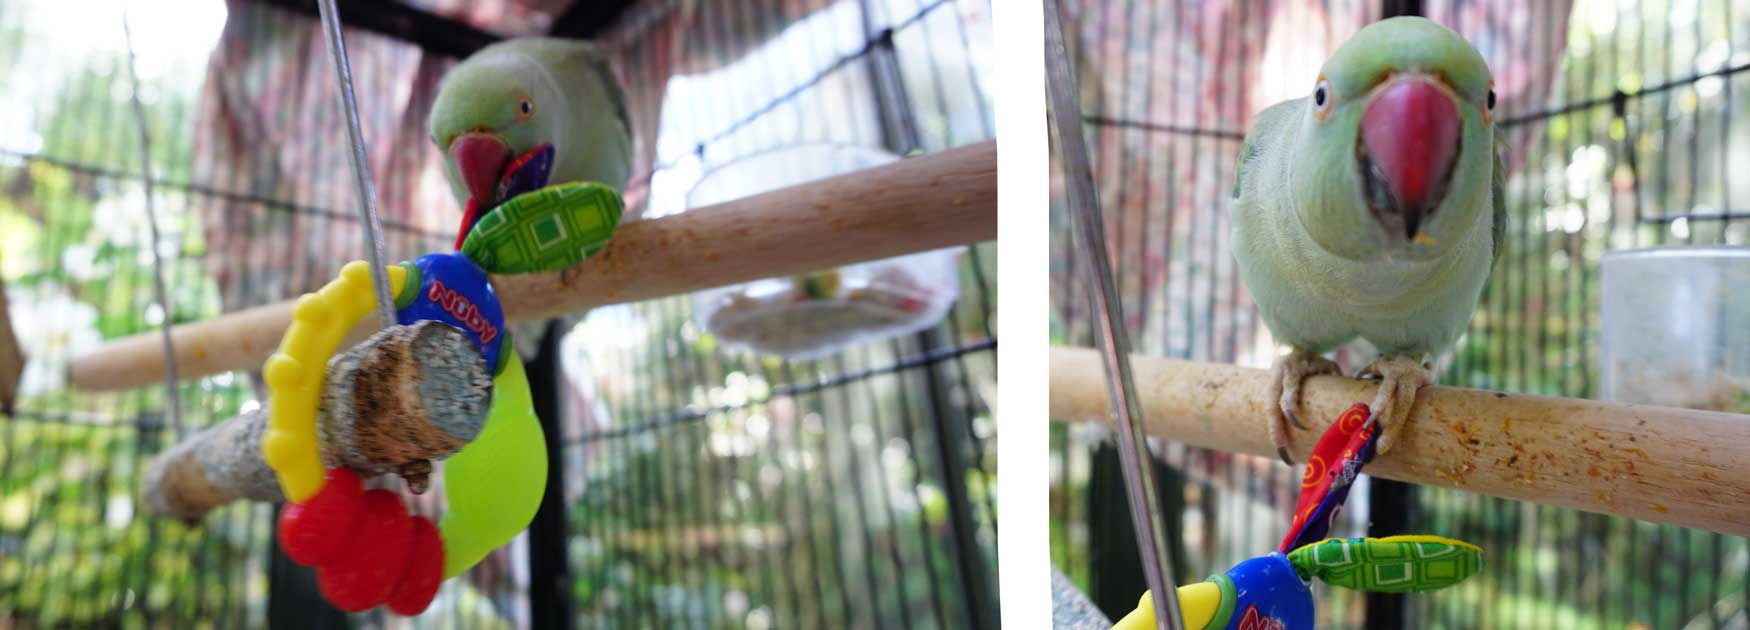 Magick the Indian Ringneck playing with her baby toy